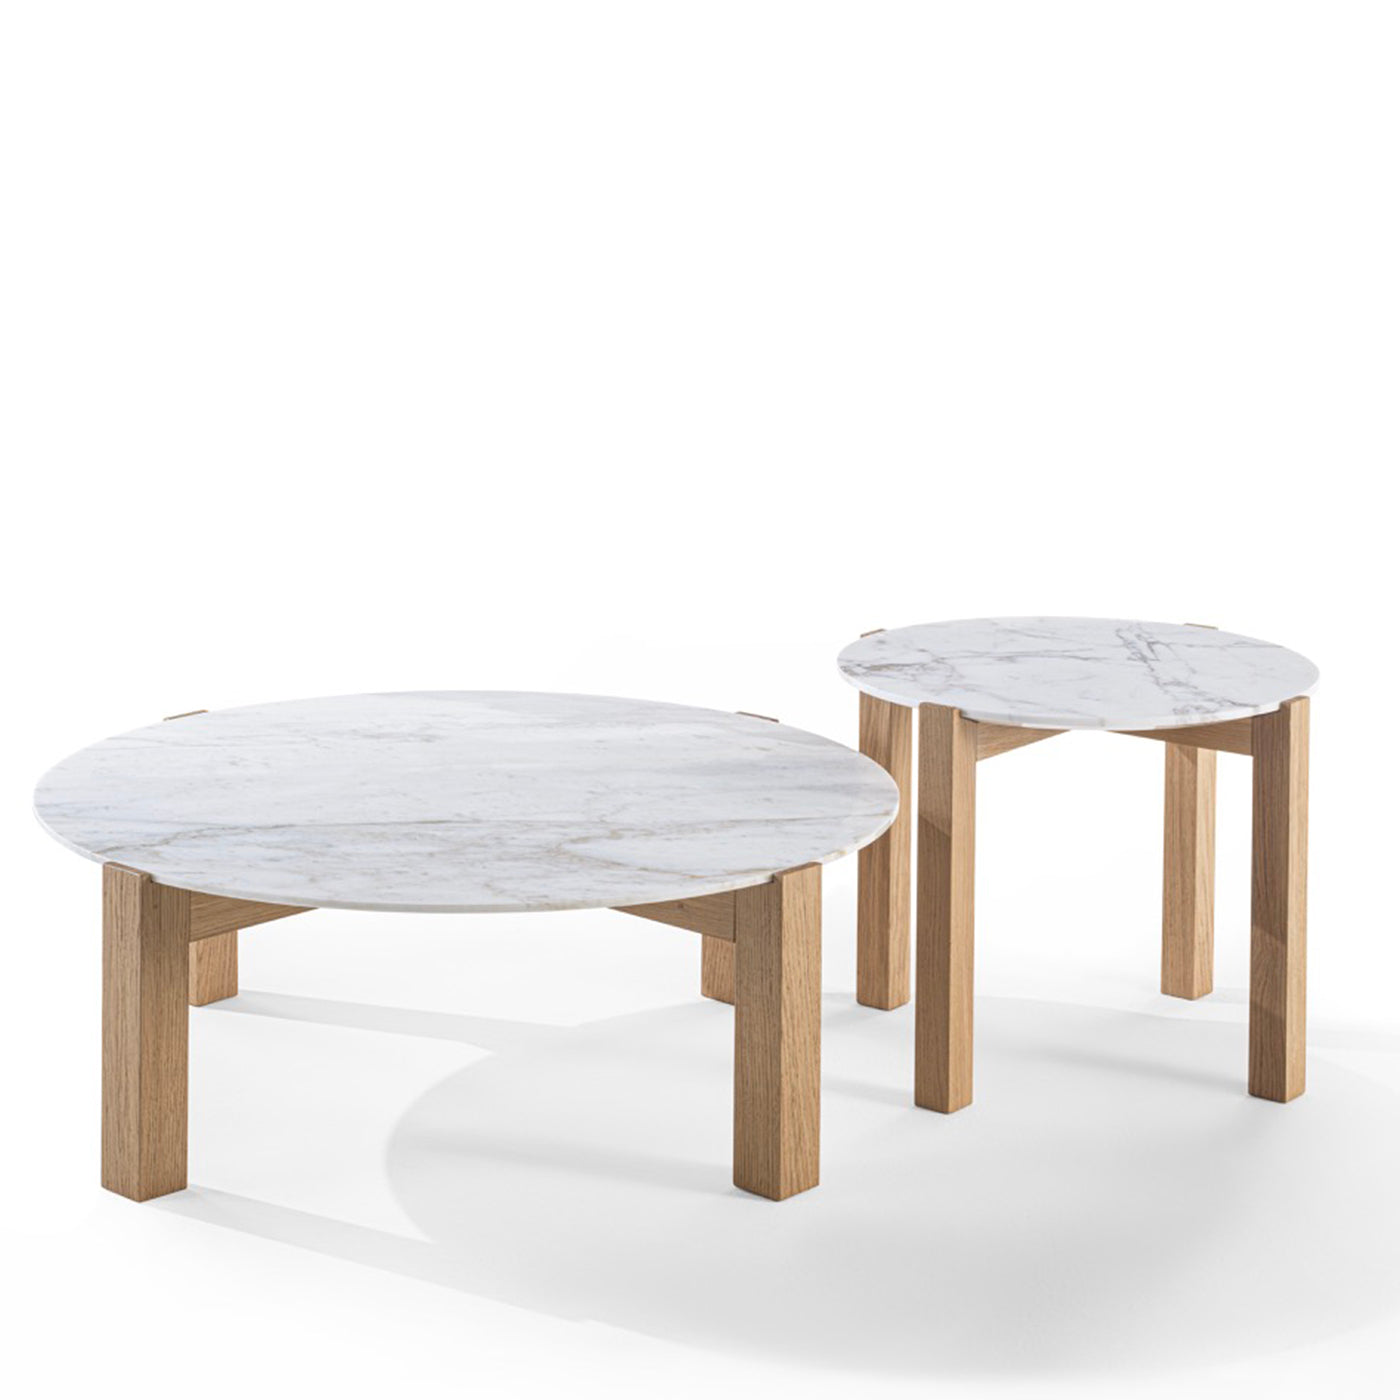 Moon 1 Round White Marble Coffee Table - Alternative view 1